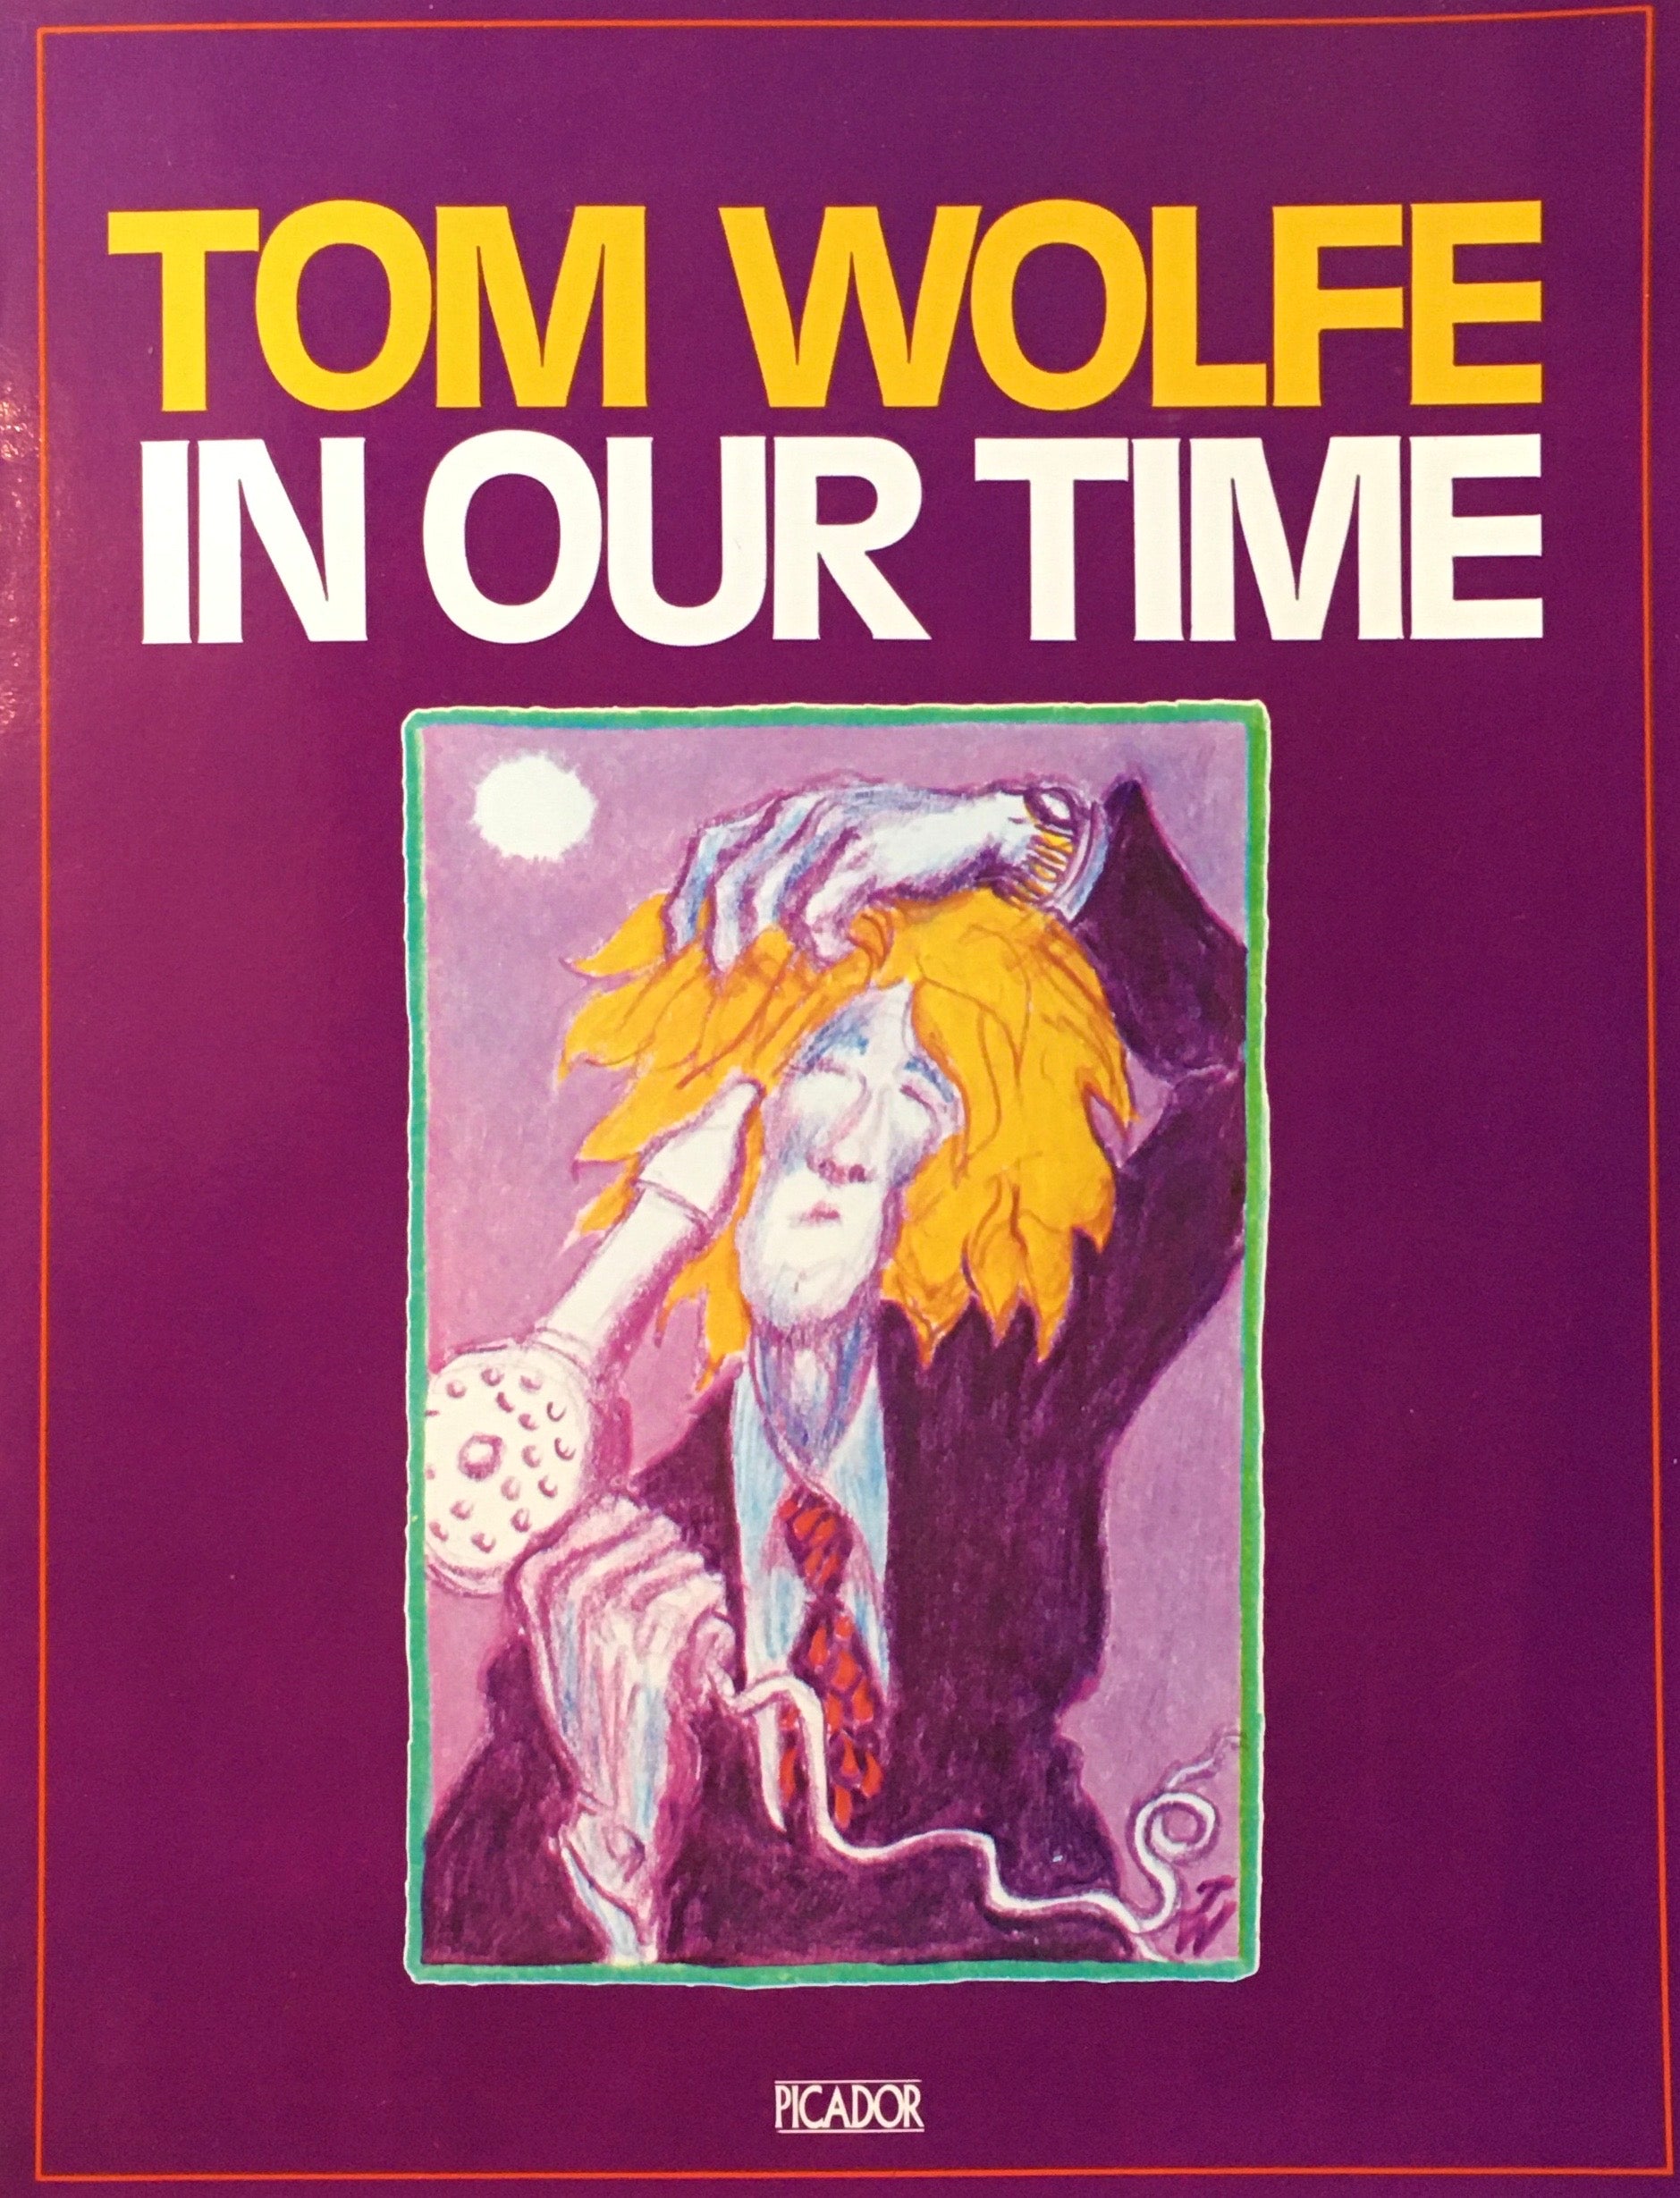 IN OUR TIME　TOM WOLFE　トム・ウルフ作品集